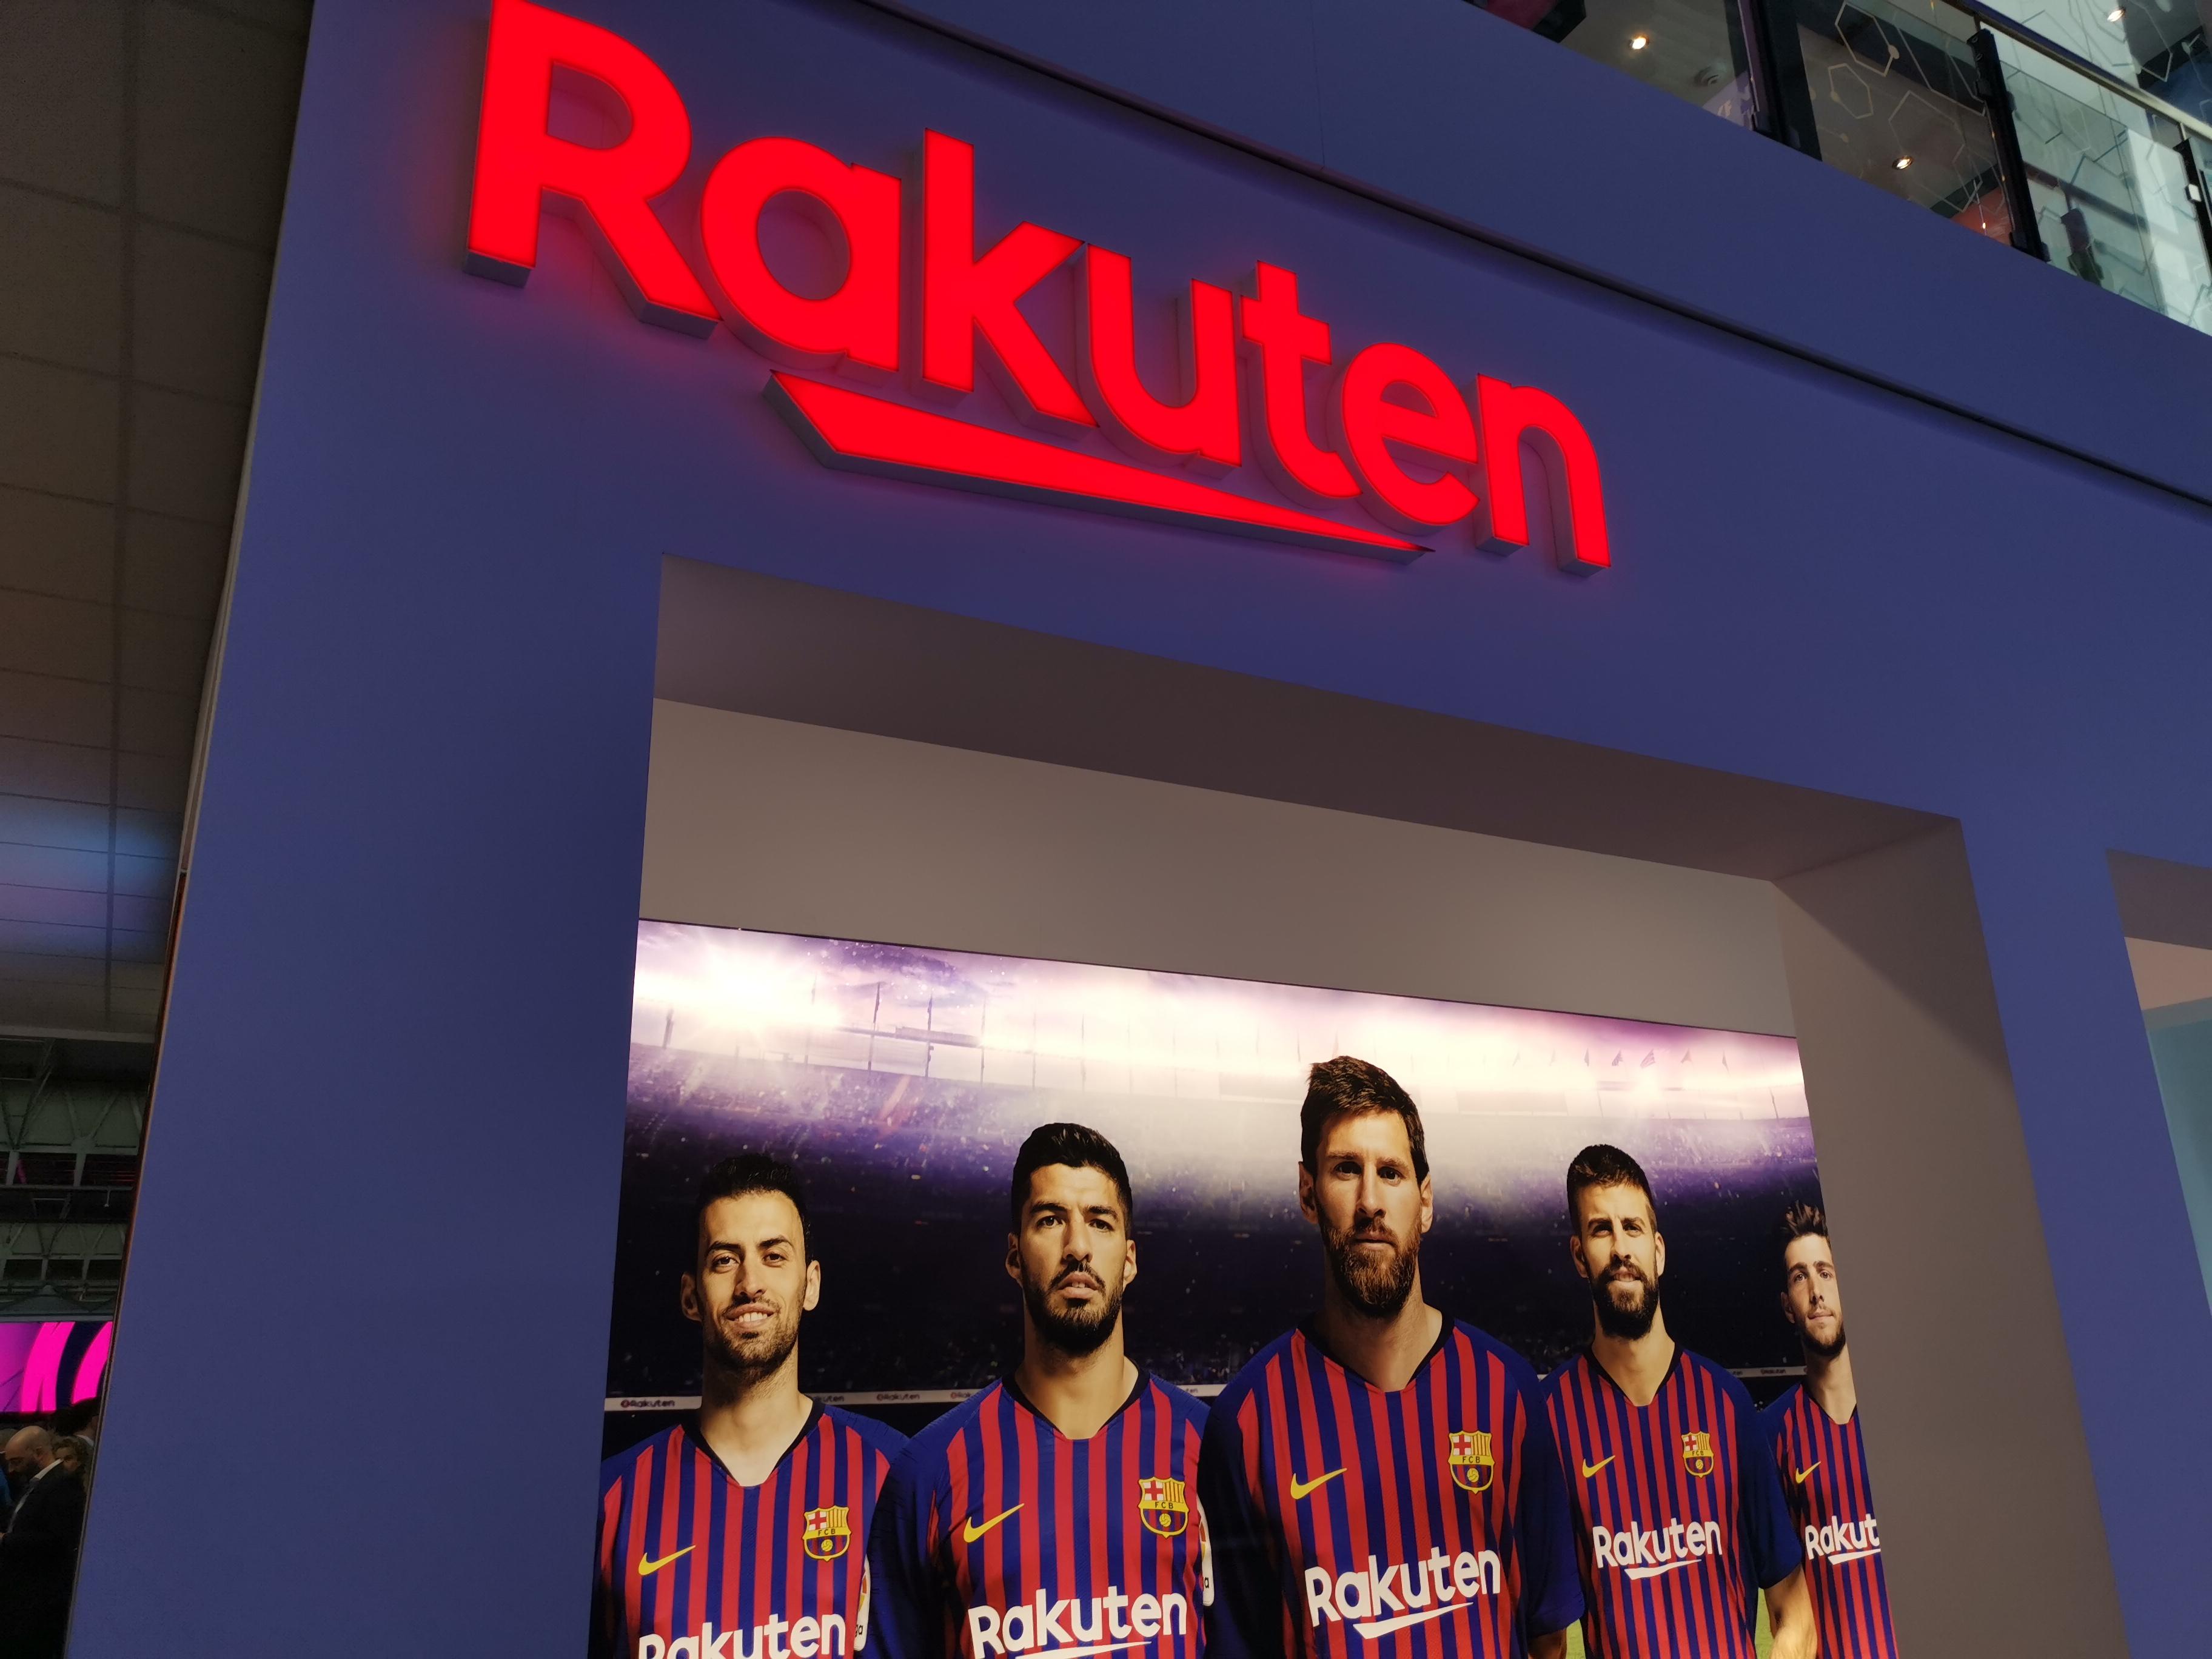 Mwc 19 The Cisco And Nokia Tech Behind Rakuten S Mobile Network Zdnet